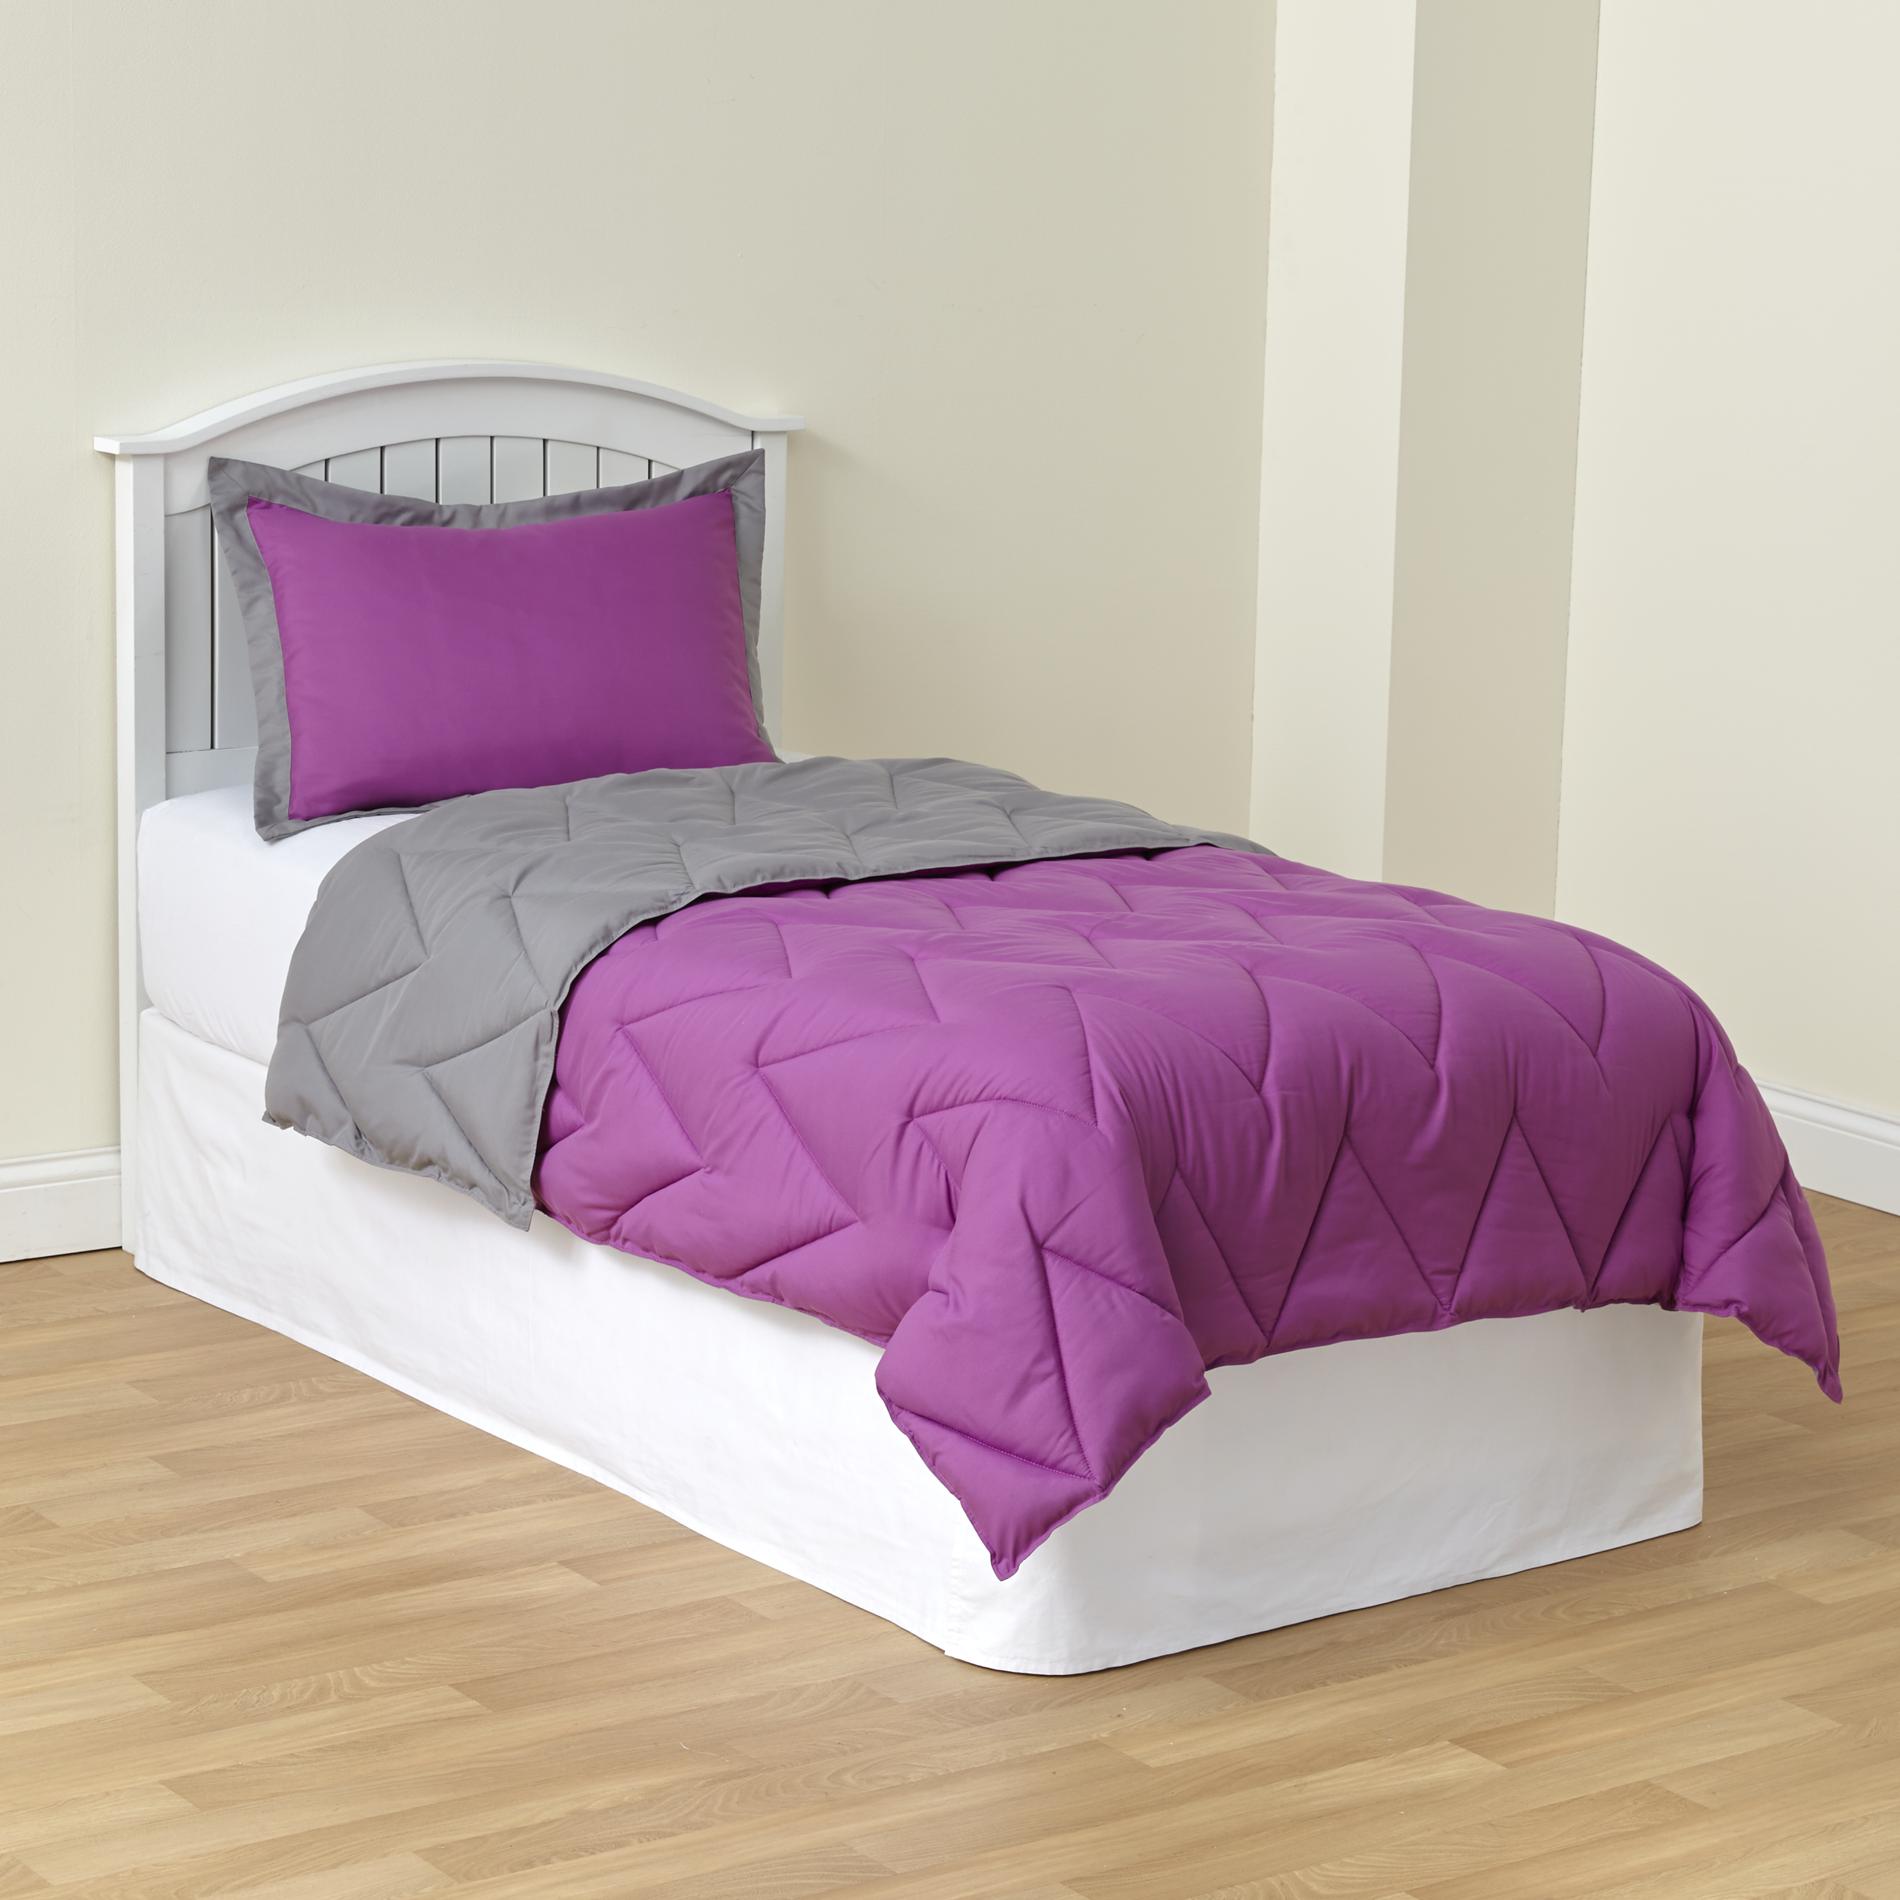 Reversible Quilted Comforter & Sham - Purple/Silver